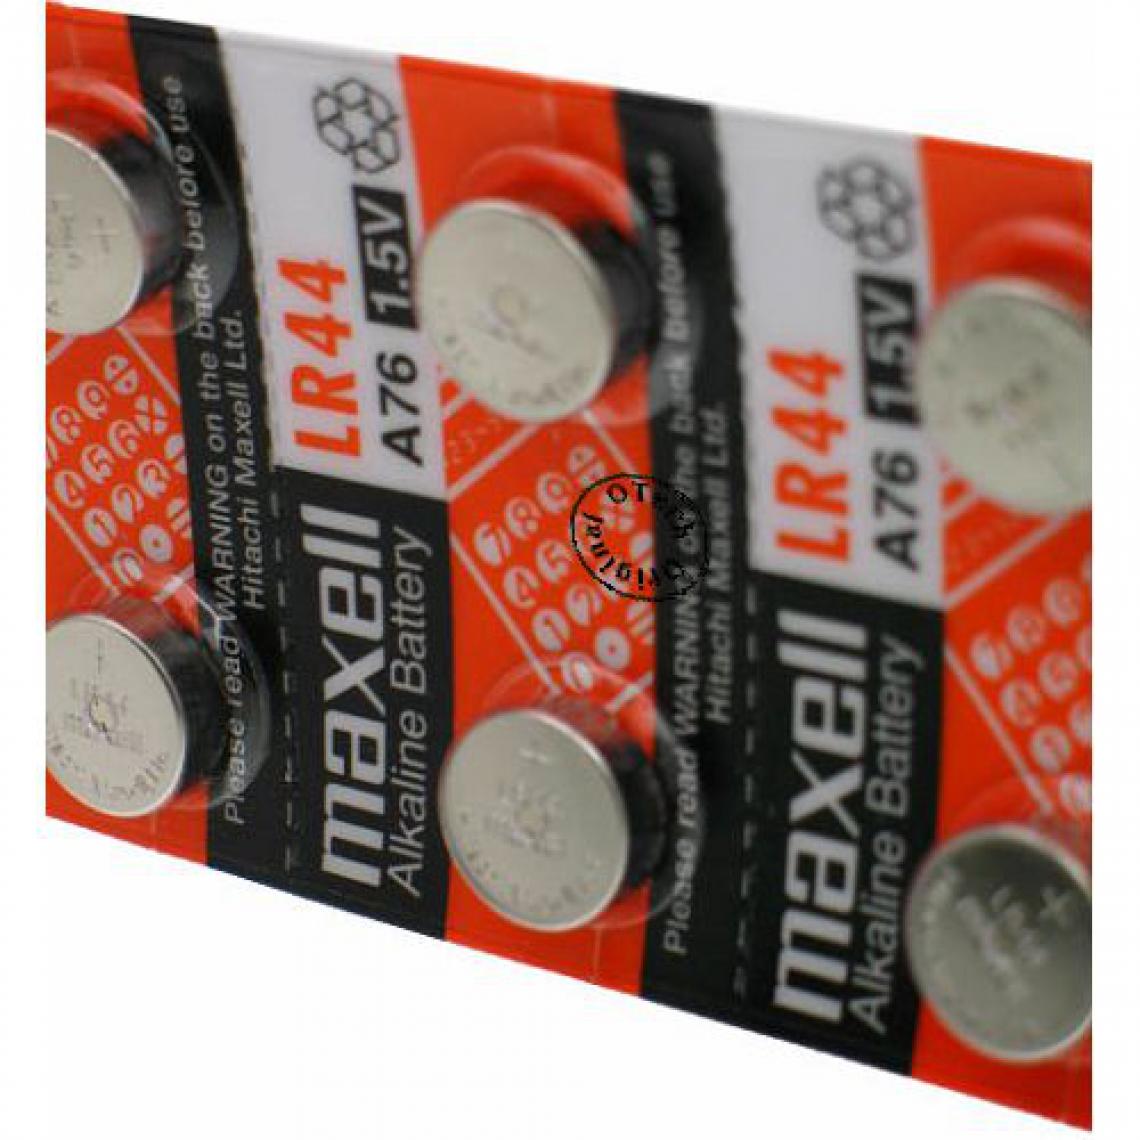 Otech - Pack de 10 piles maxell pour MAXELL CA19 - Piles rechargeables